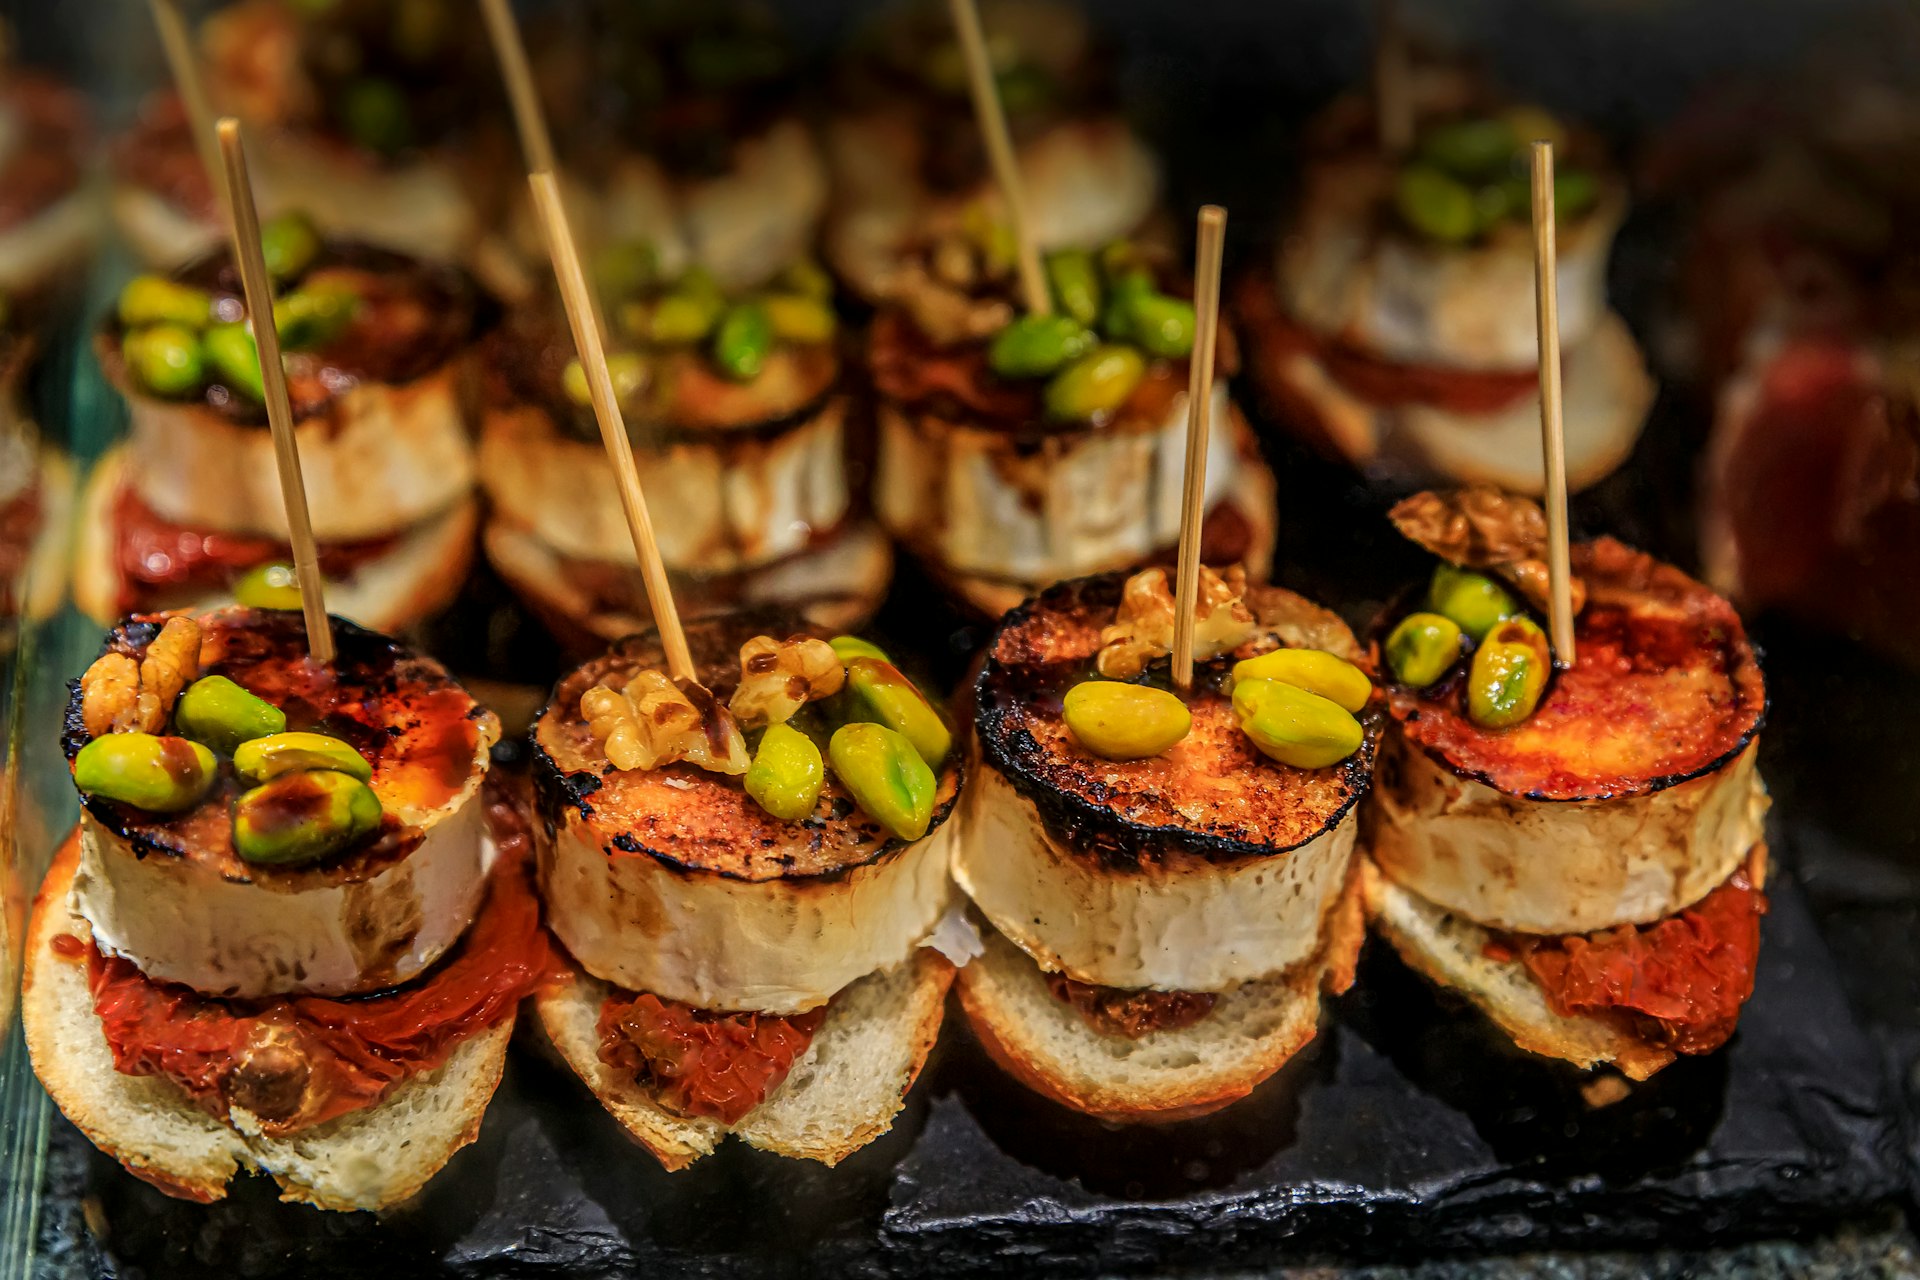 Traditional Spanish pintxos with goat cheese, pistachios, walnuts and red piquillo pepper at a bar in San Sebastián (Donostia), Basque Country, Spain